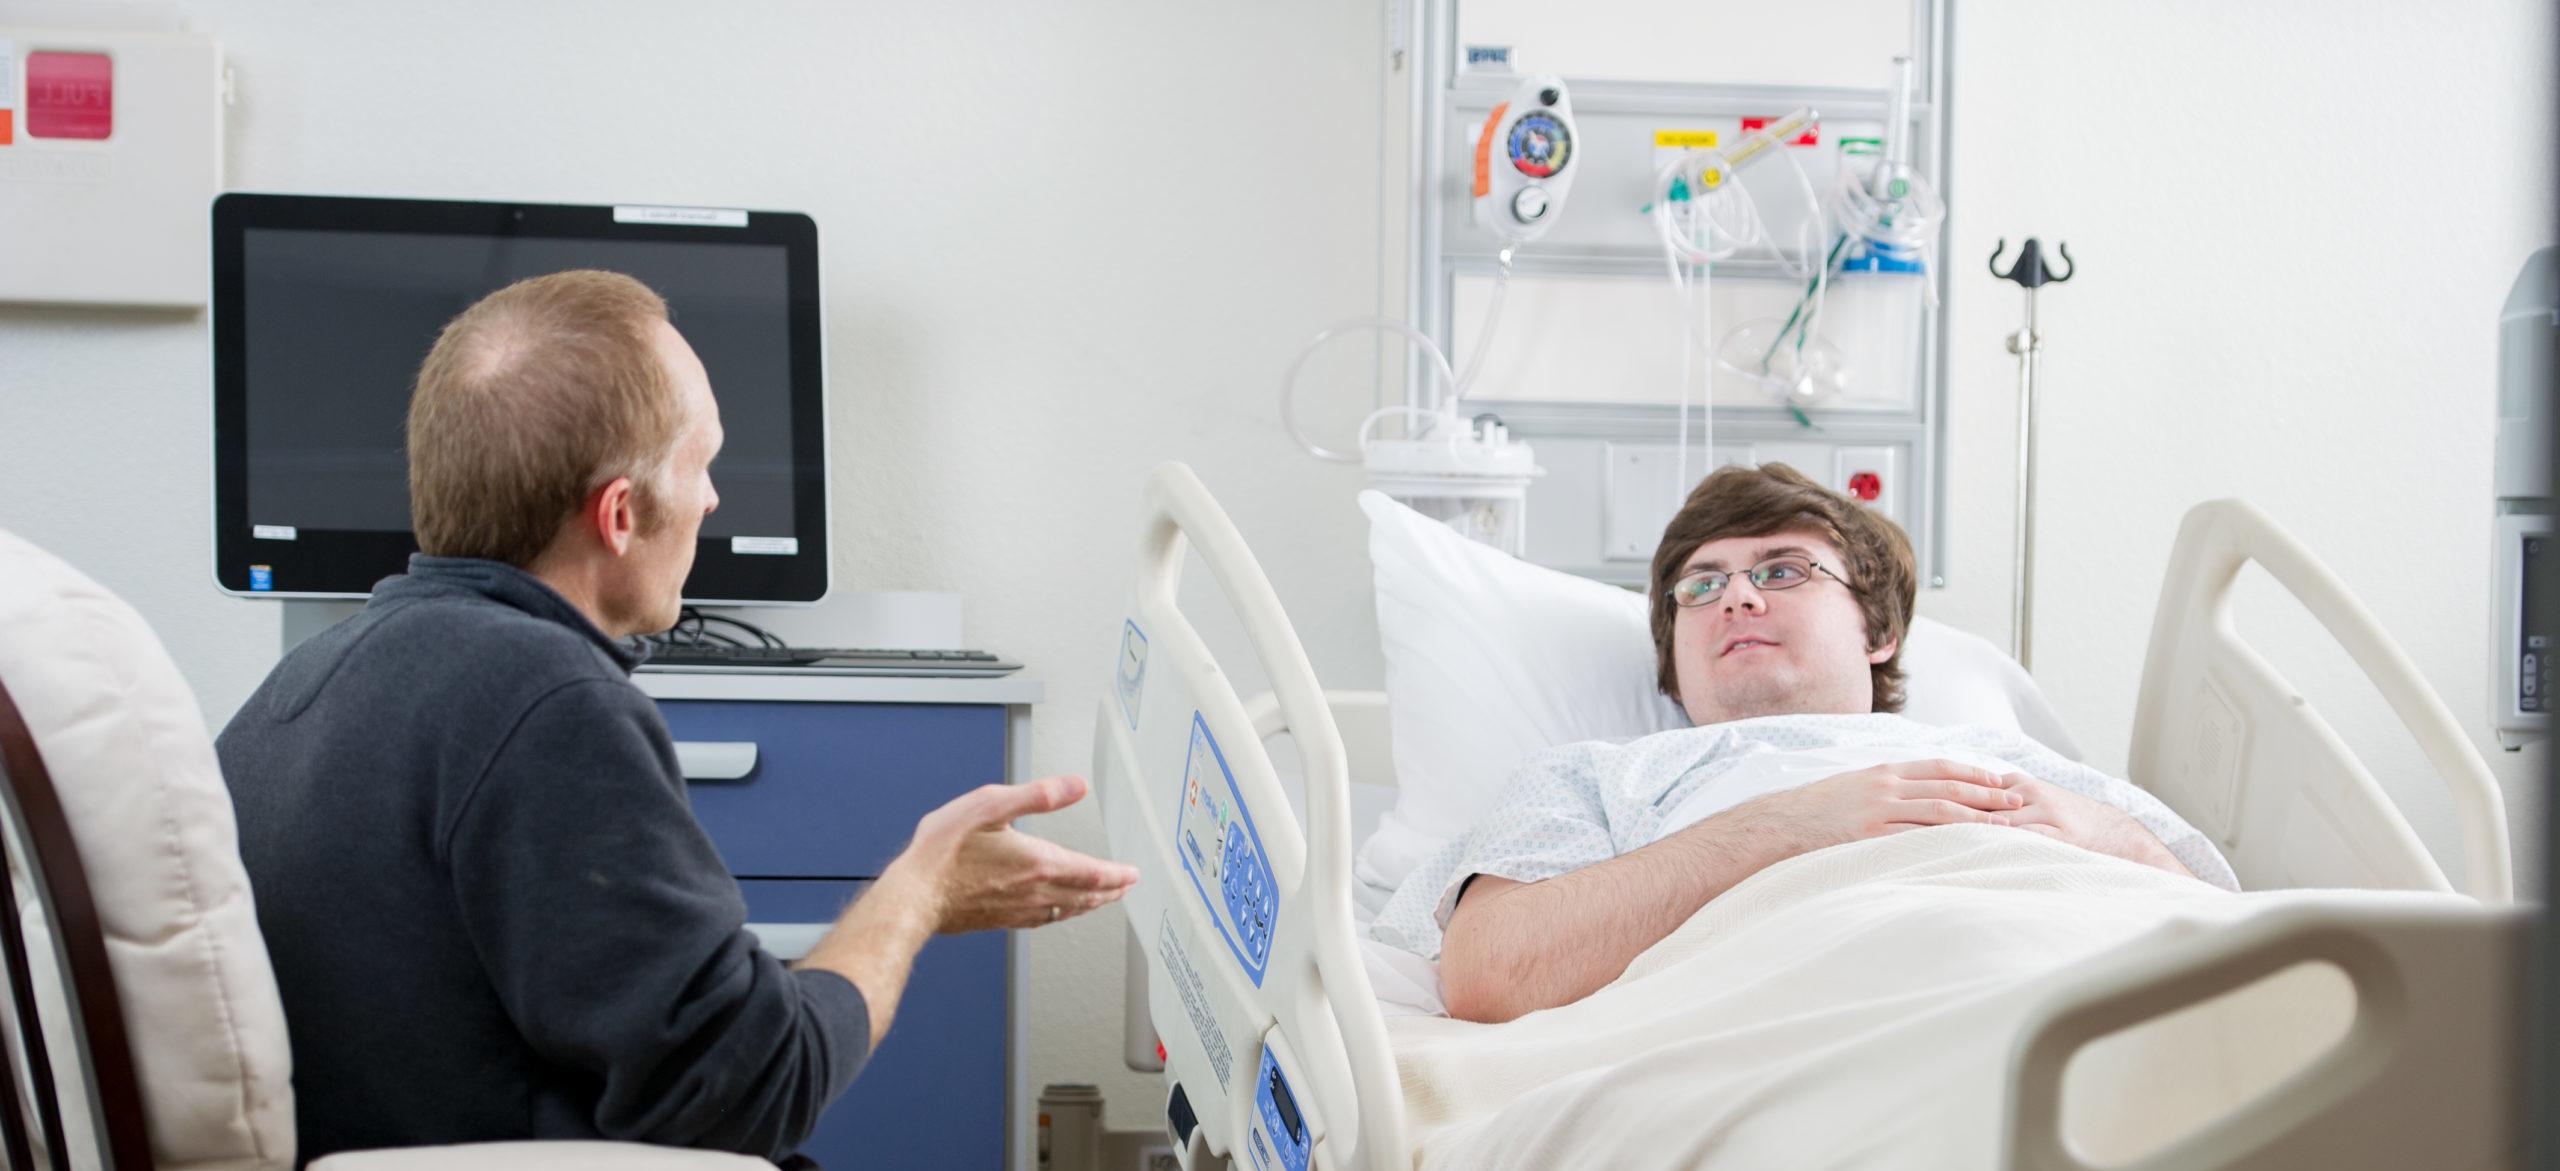 Social worker talking to man in the hospital.